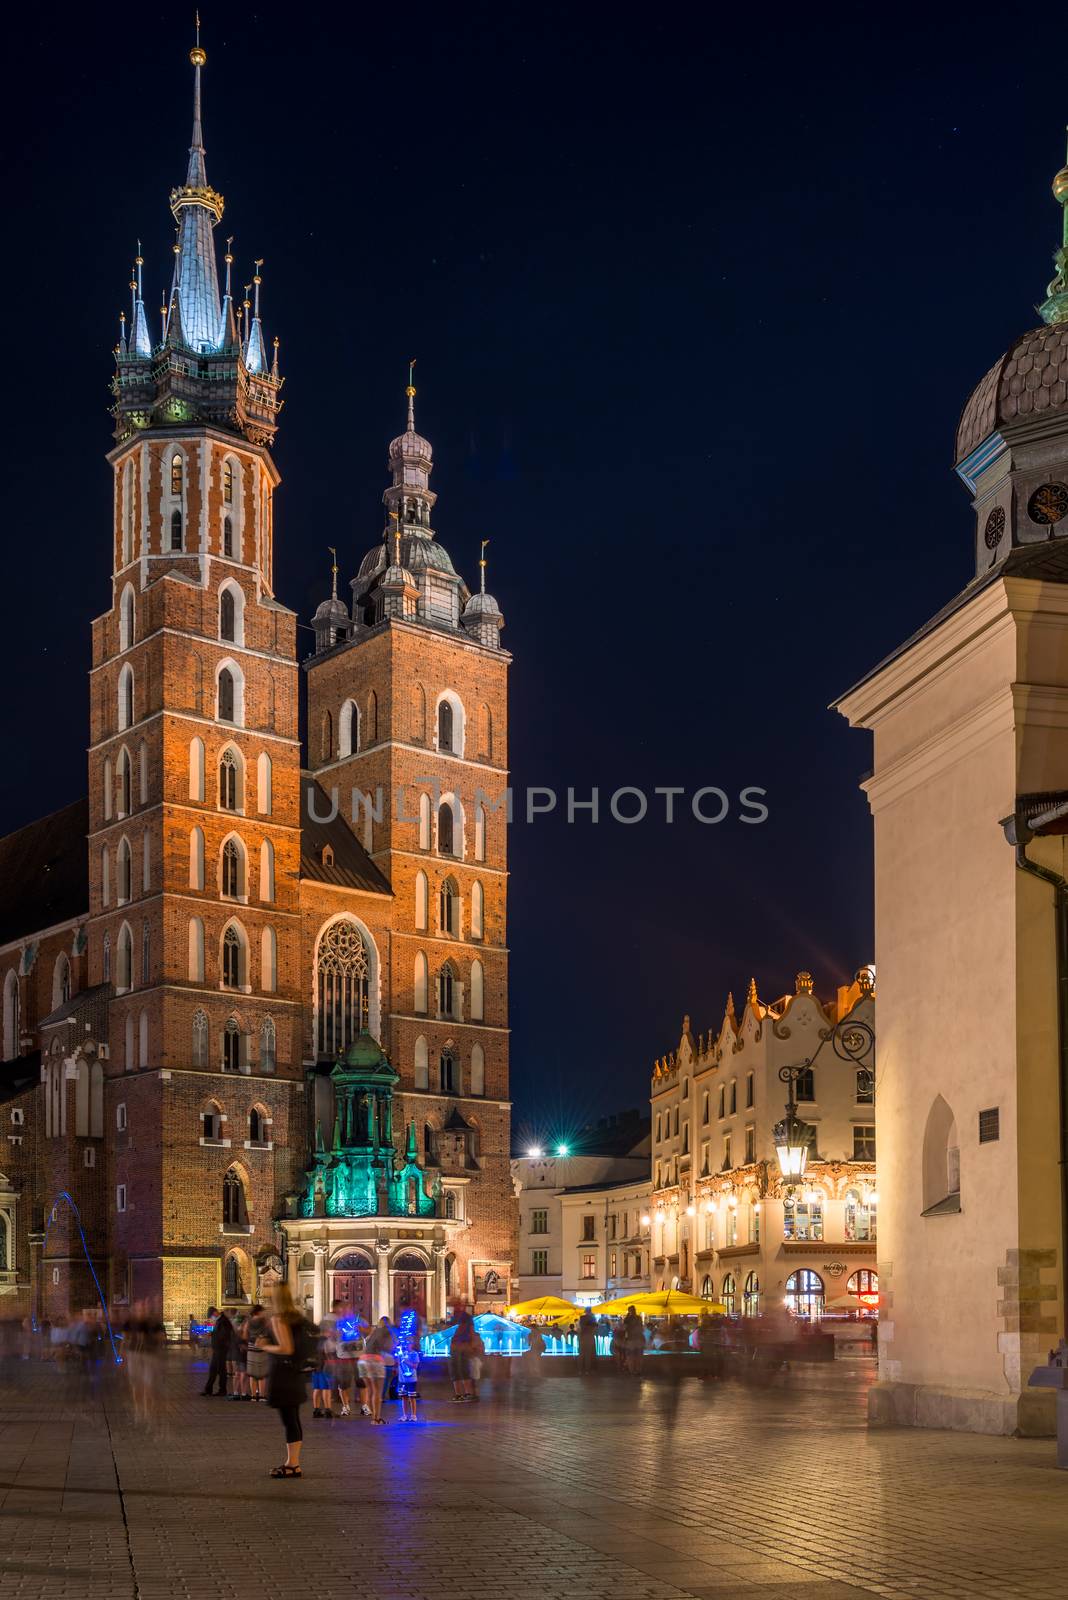 vertical night view of the Church of St. Mary in Krakow, Poland by kosmsos111